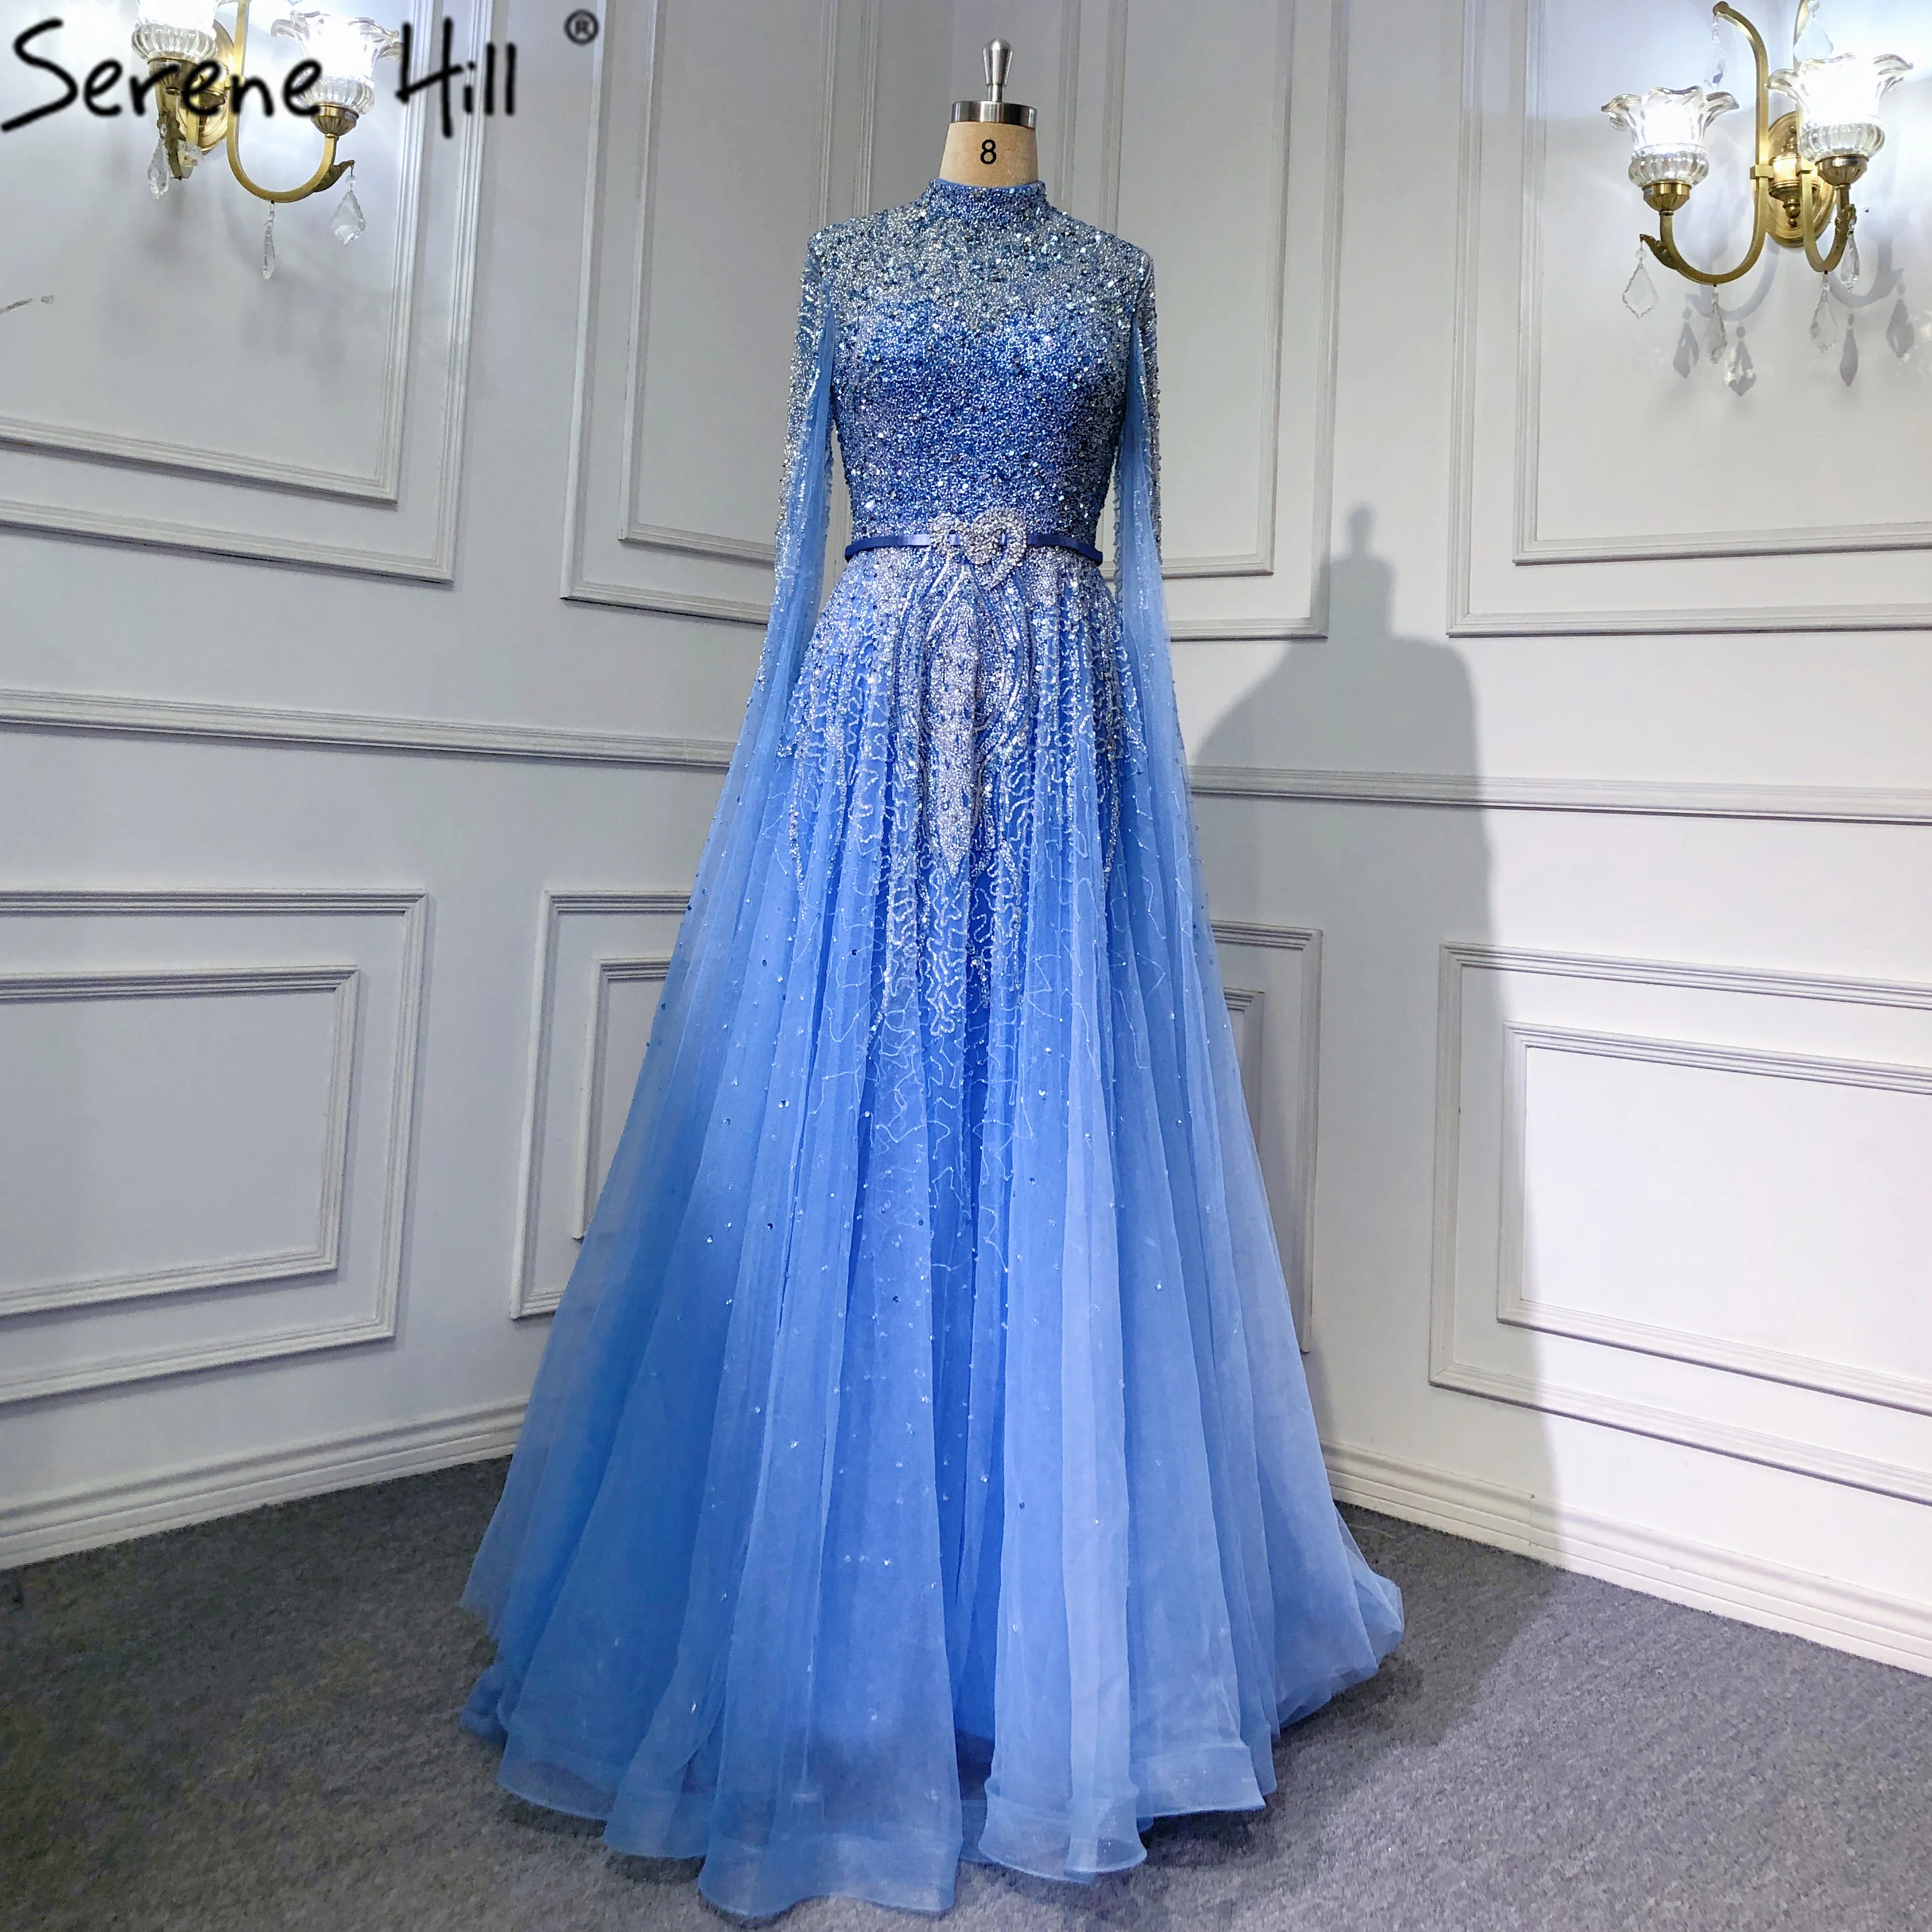 Serene Hill Blue Luxury Cape Sleeves Evening Dresses Gowns 2022 A-Line ...